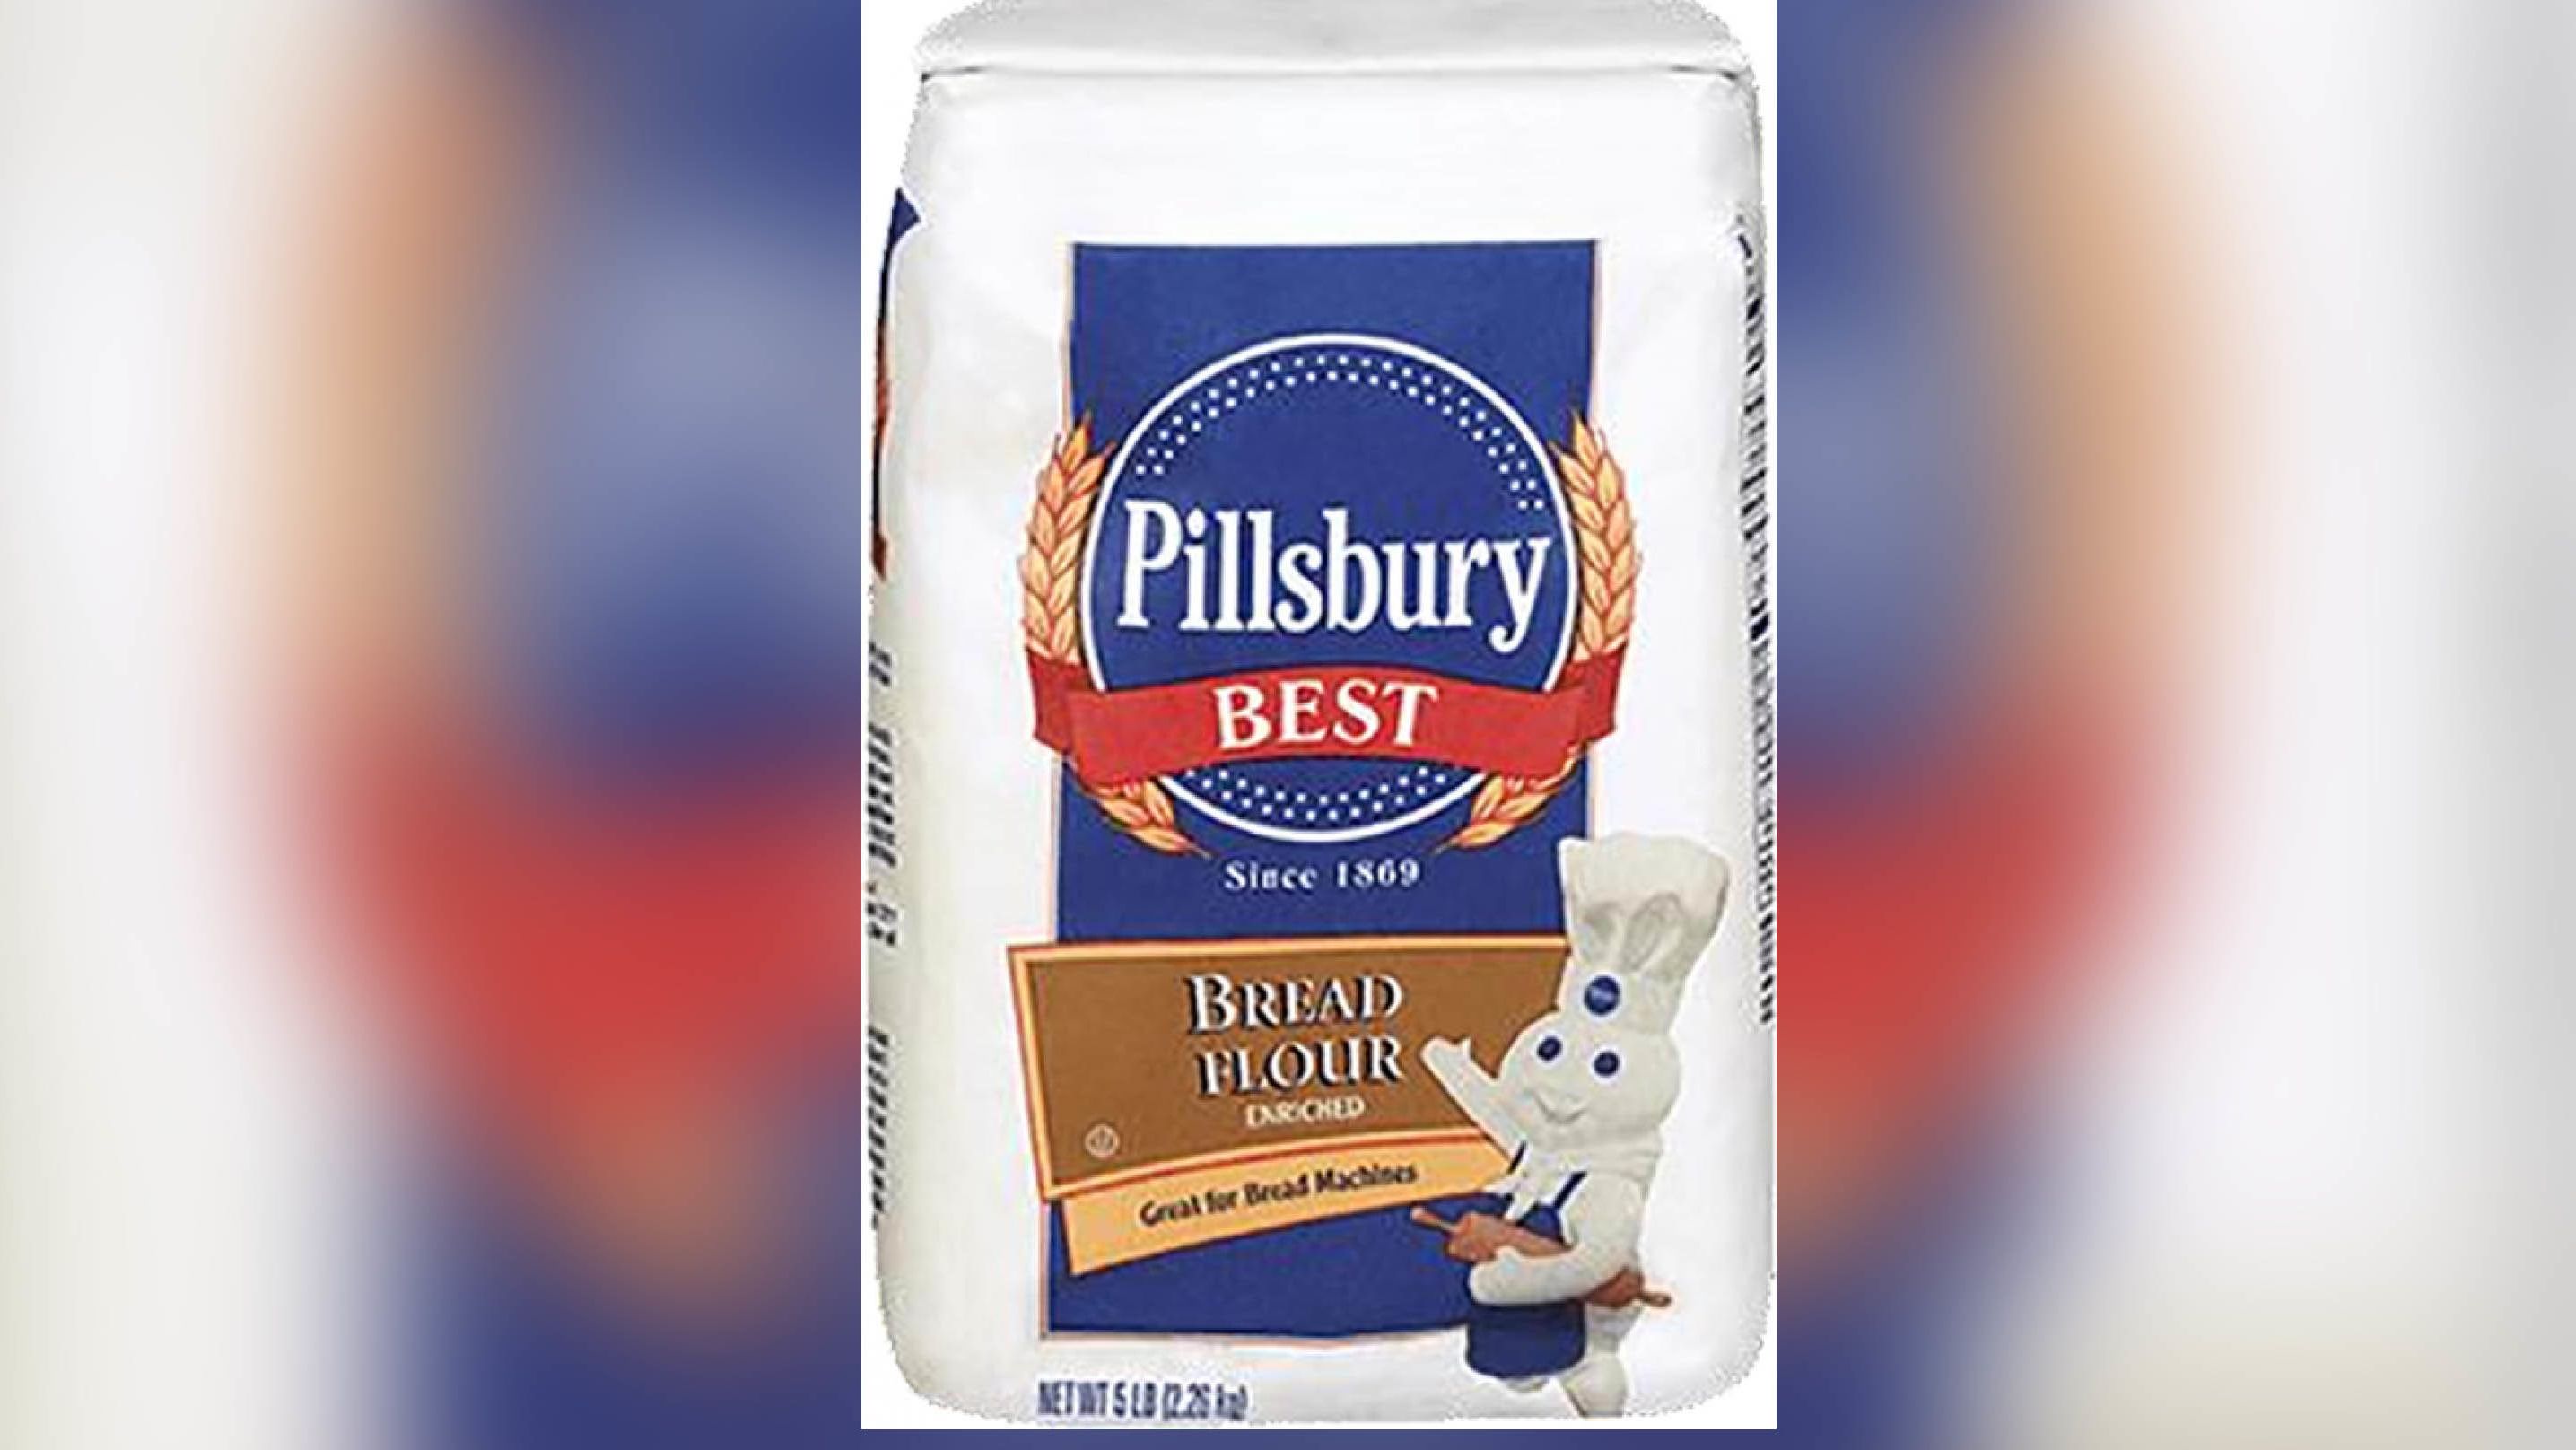 Pillsbury has recalled its 'Best Bread Flour' from stores because of possible E. coli contamination.